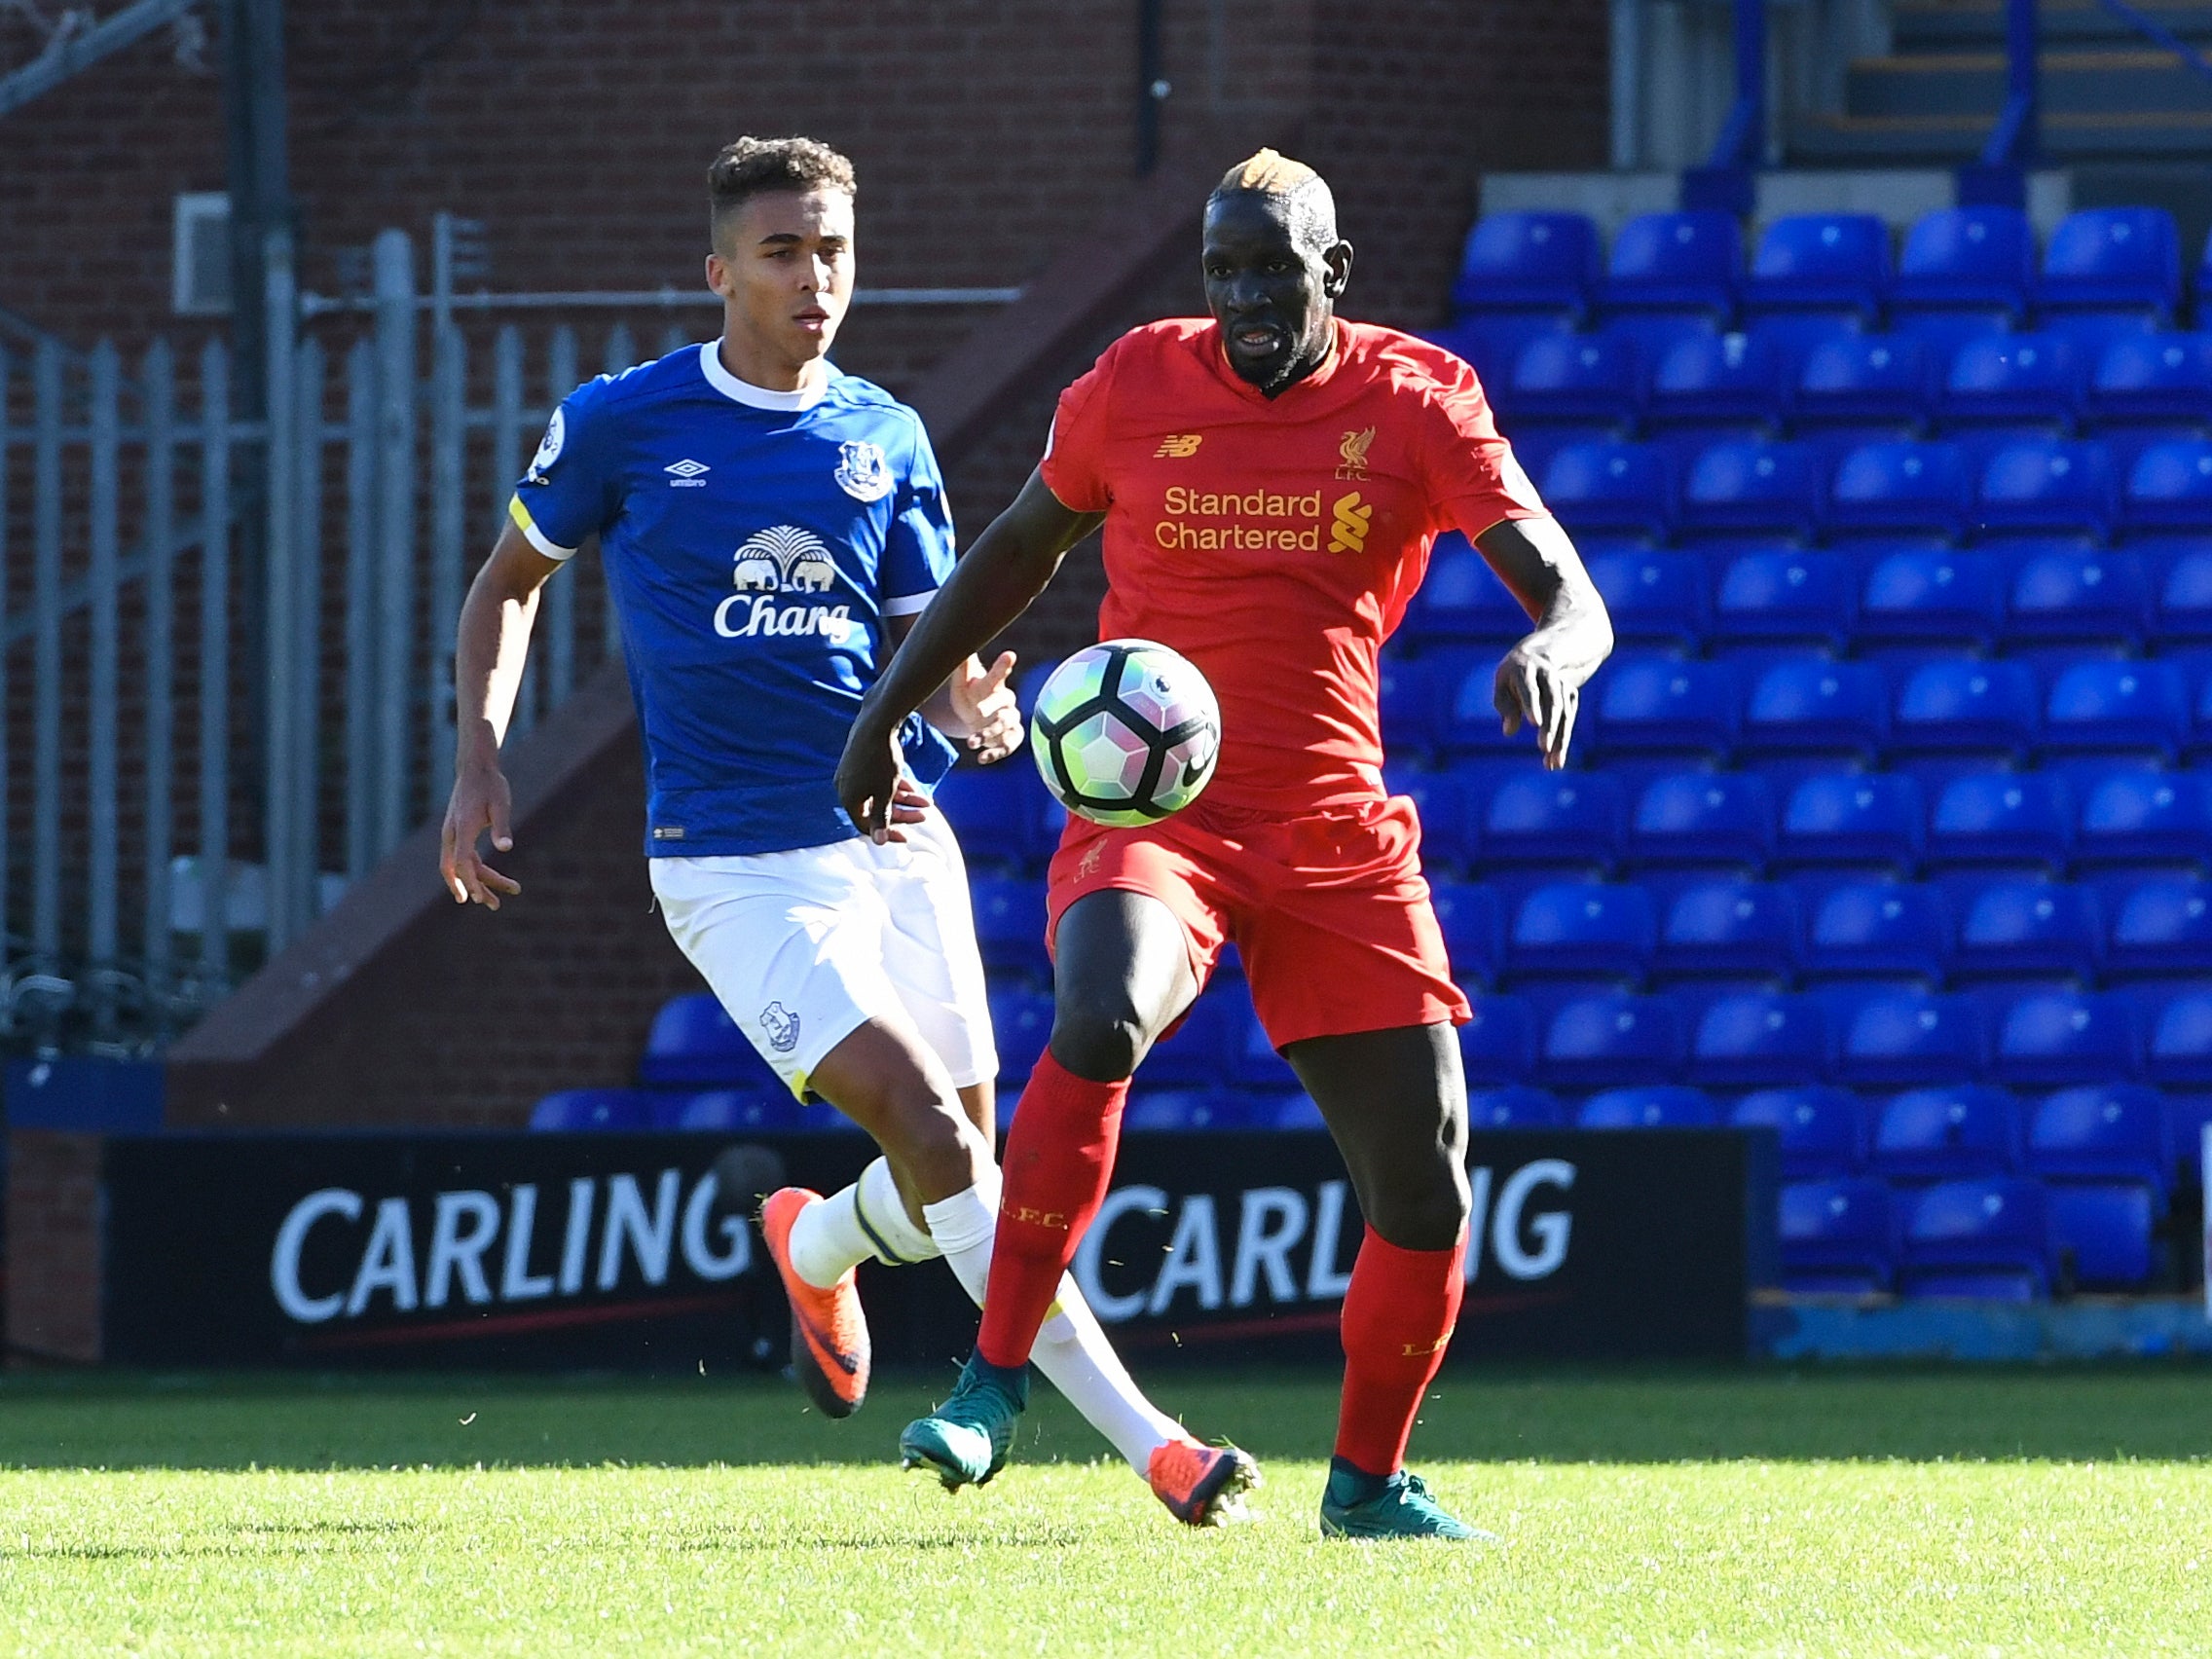 Sakho was forced to play for Liverpool's U23 team after falling out of favour with Klopp